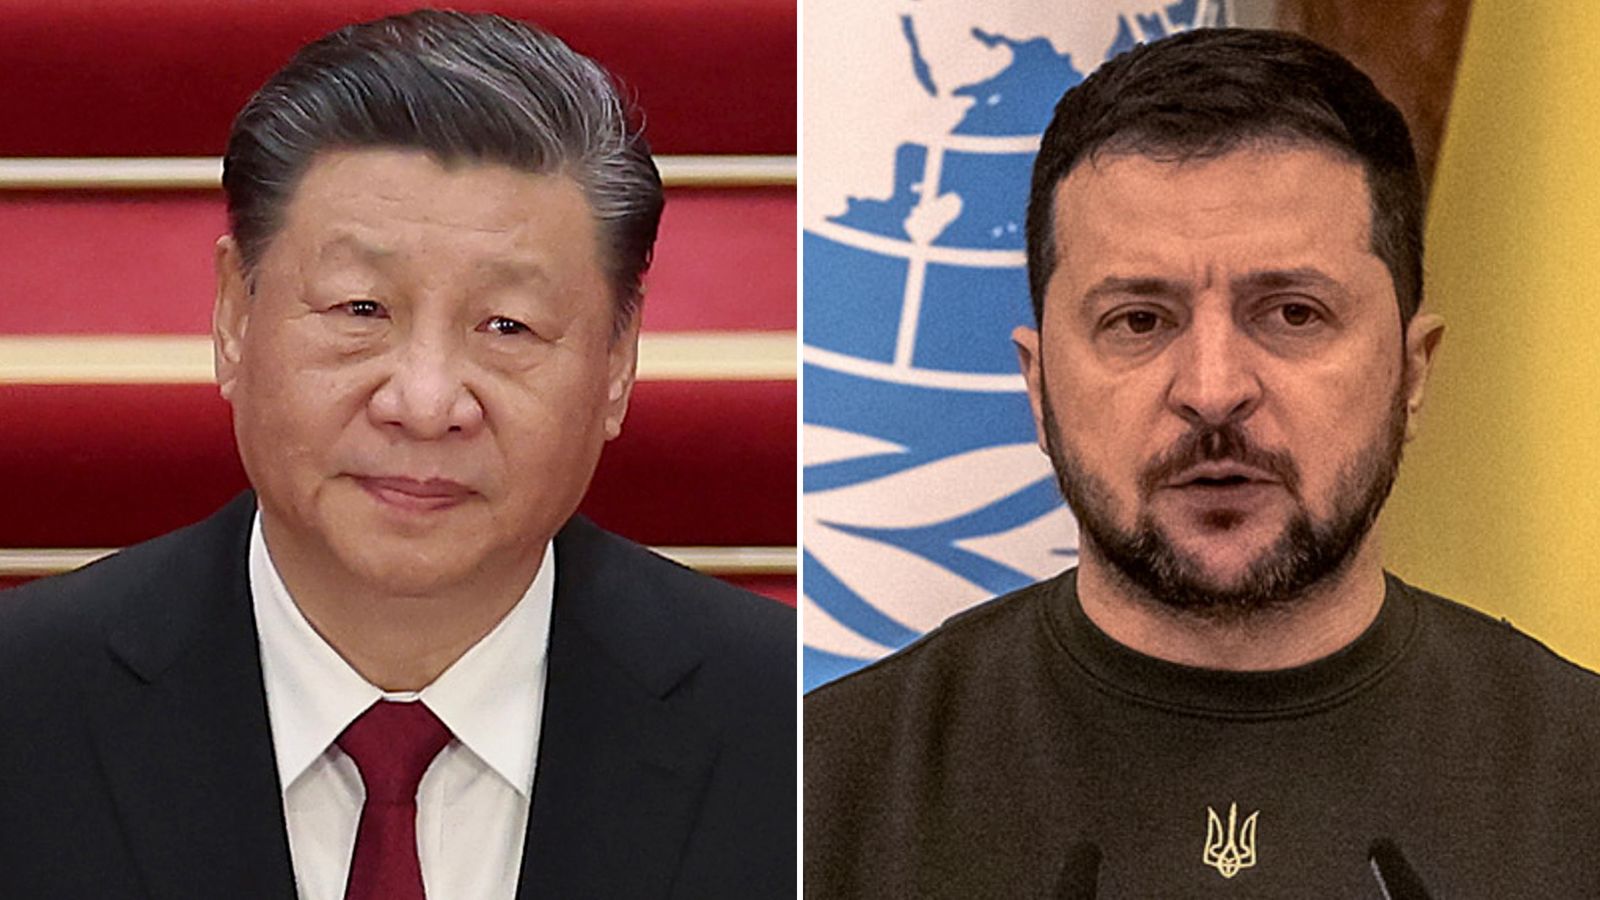 Xi Jinping speaks with Ukraine's Zelensky for first time since Russia's invasion | CNN